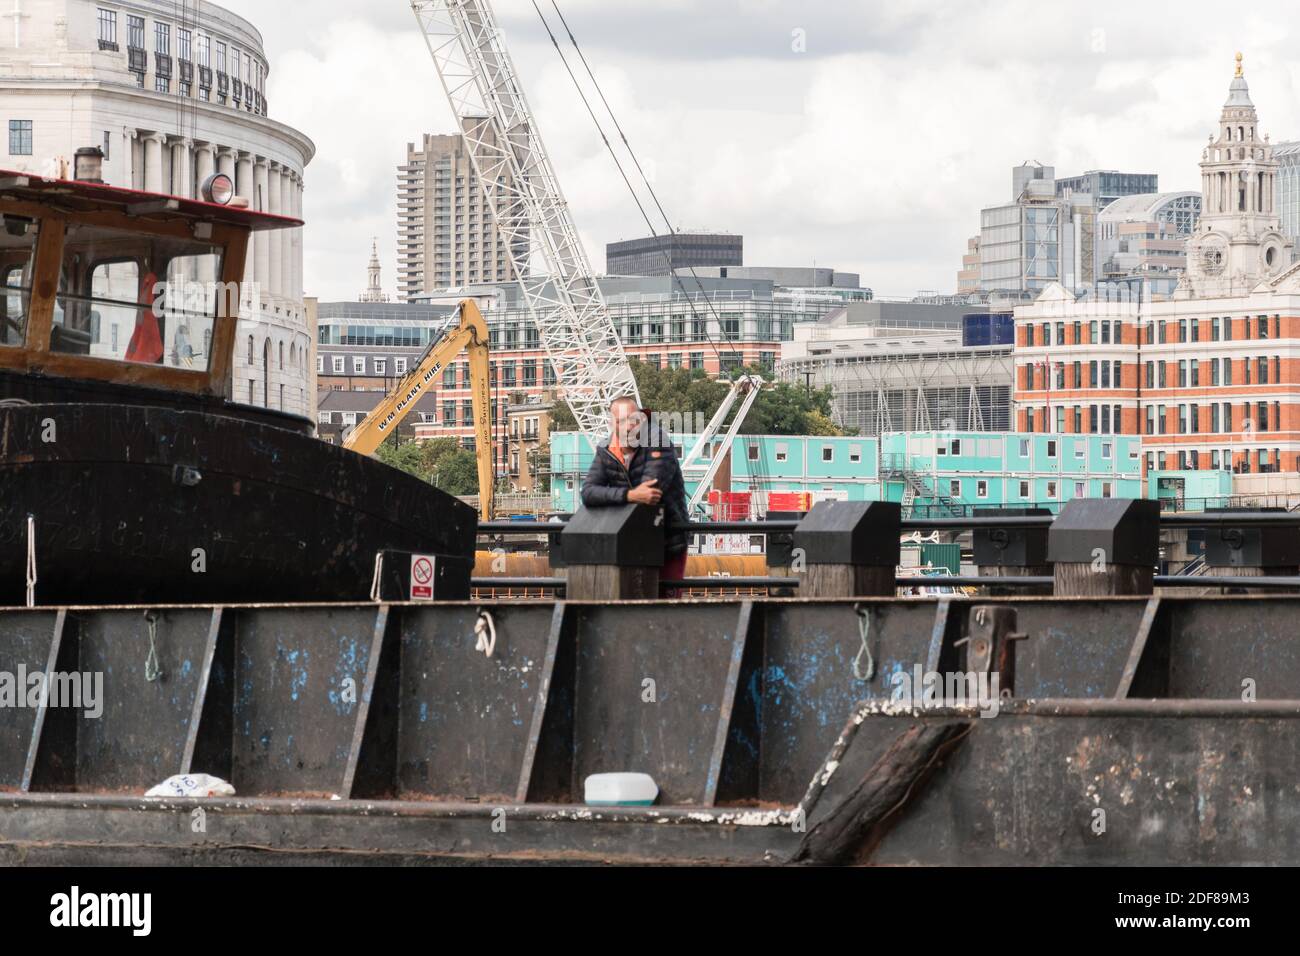 A beached dredger on the banks of the River Thames Stock Photo